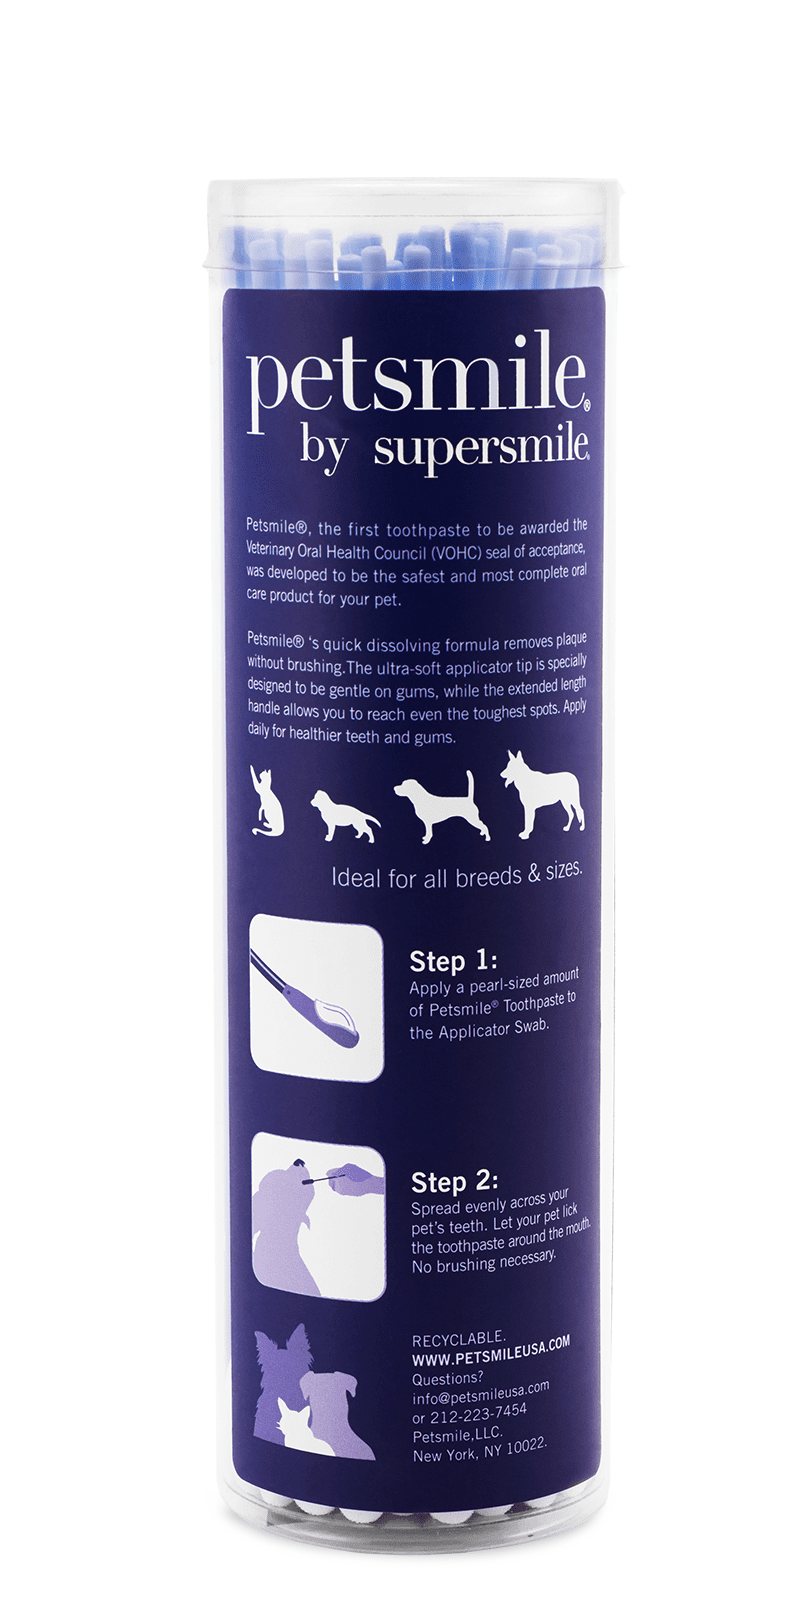 petsmile dog toothpaste swabs, easy hygiene , Three simple steps to cleaner teeth , petsmile dog toothpaste applicators in purple , Convenient and easy to use toothpaste swabs , petsmile toothpaste applicator for dog's health